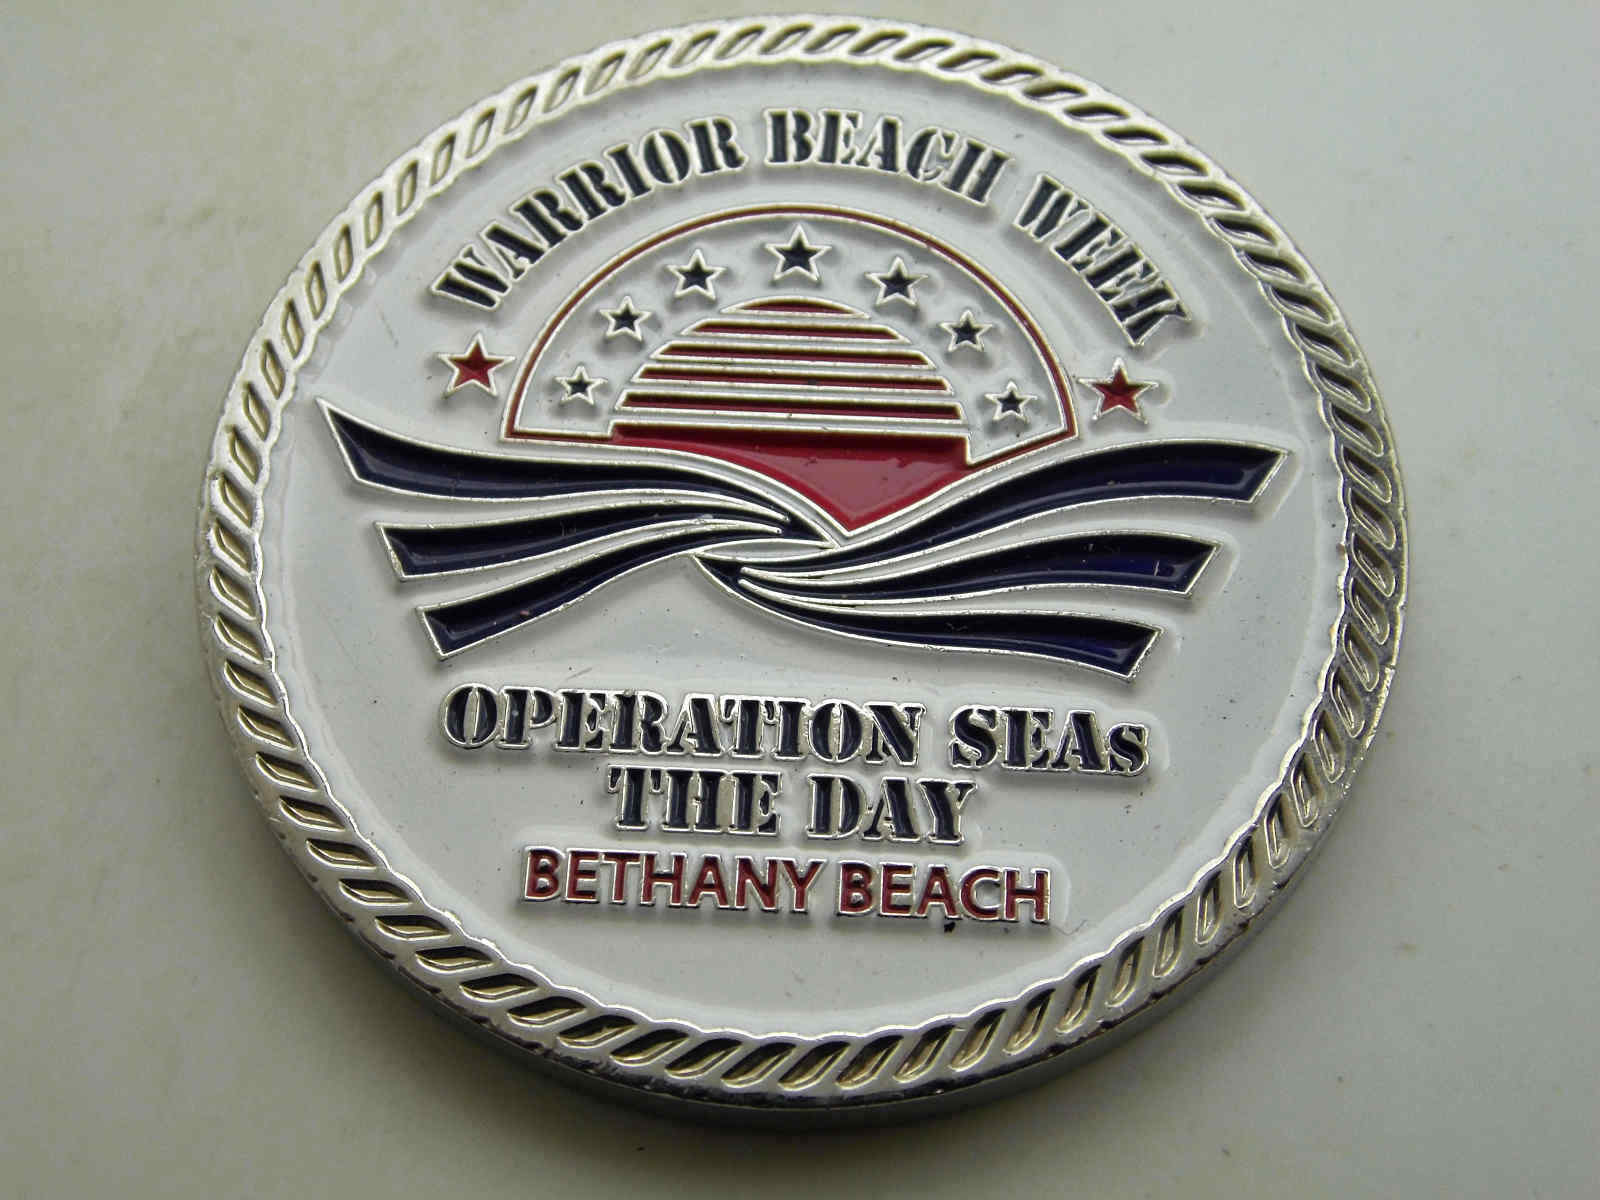 WARRIOR BEACH WEEK OPERATION SEA THE DAY BETHANY BEACH CHALLENGE COIN